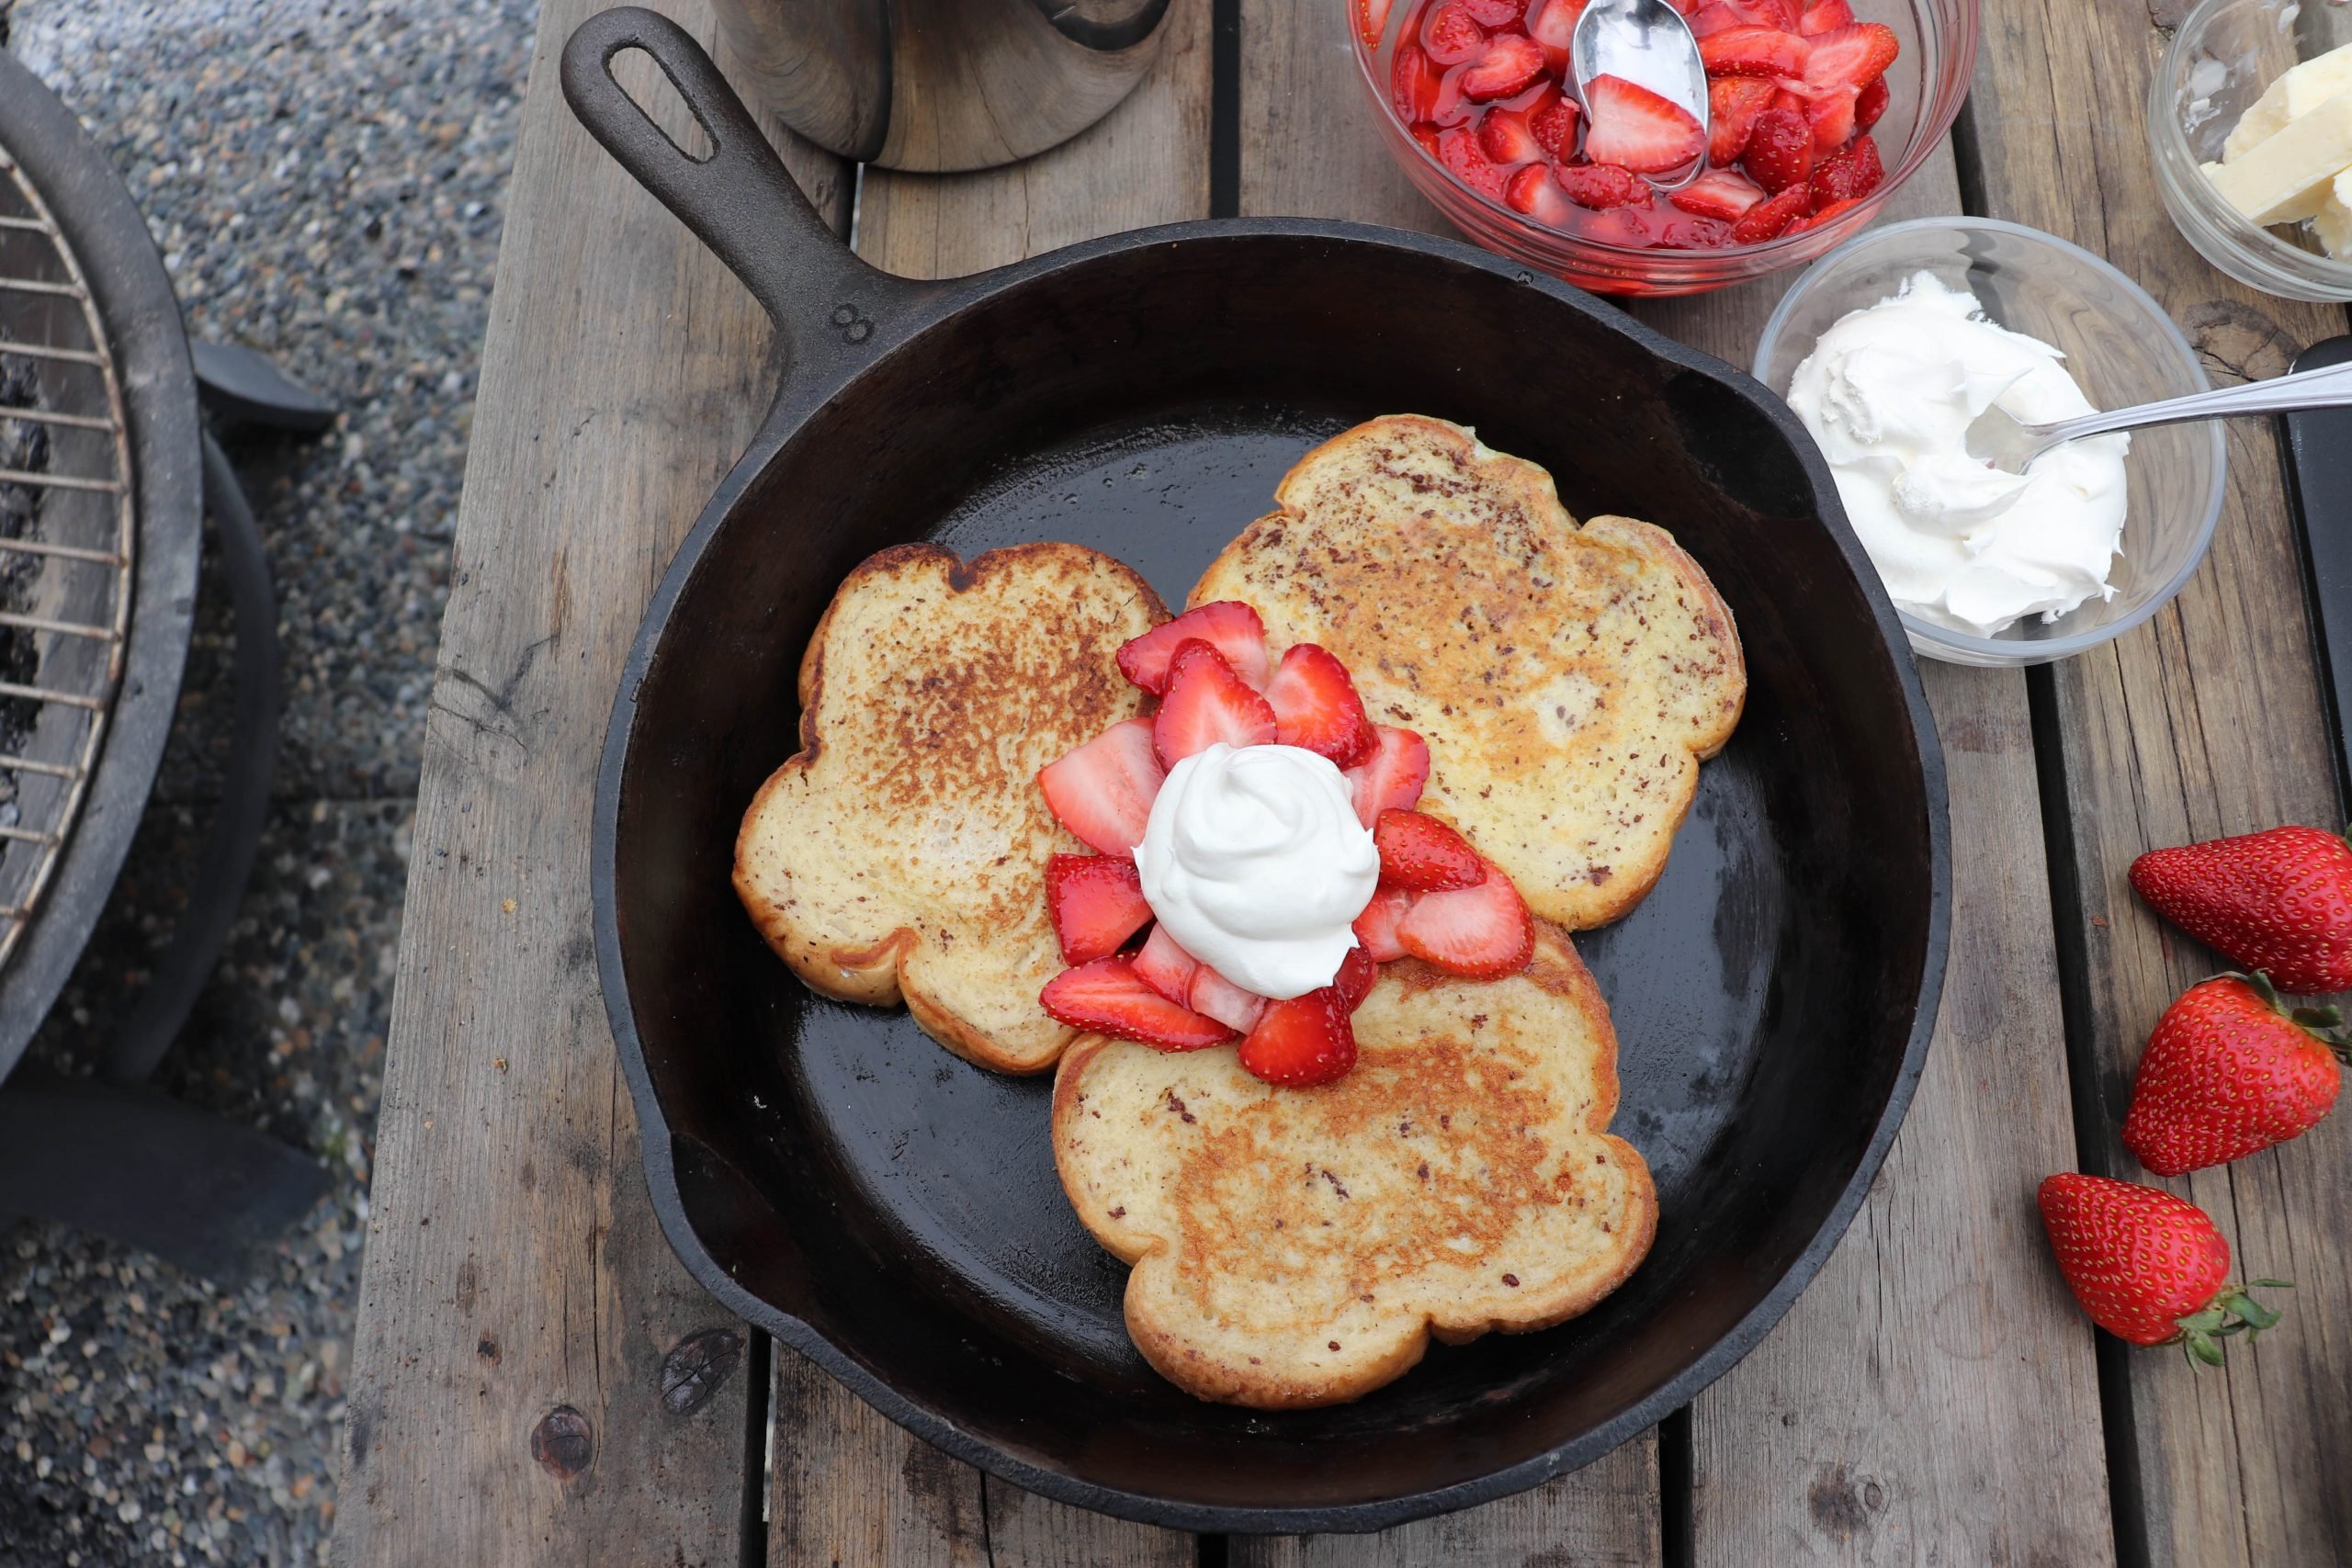 https://campfirefoodie.com/wp-content/uploads/2021/03/Skillet-French-Toast-Recipe-14-scaled.jpg